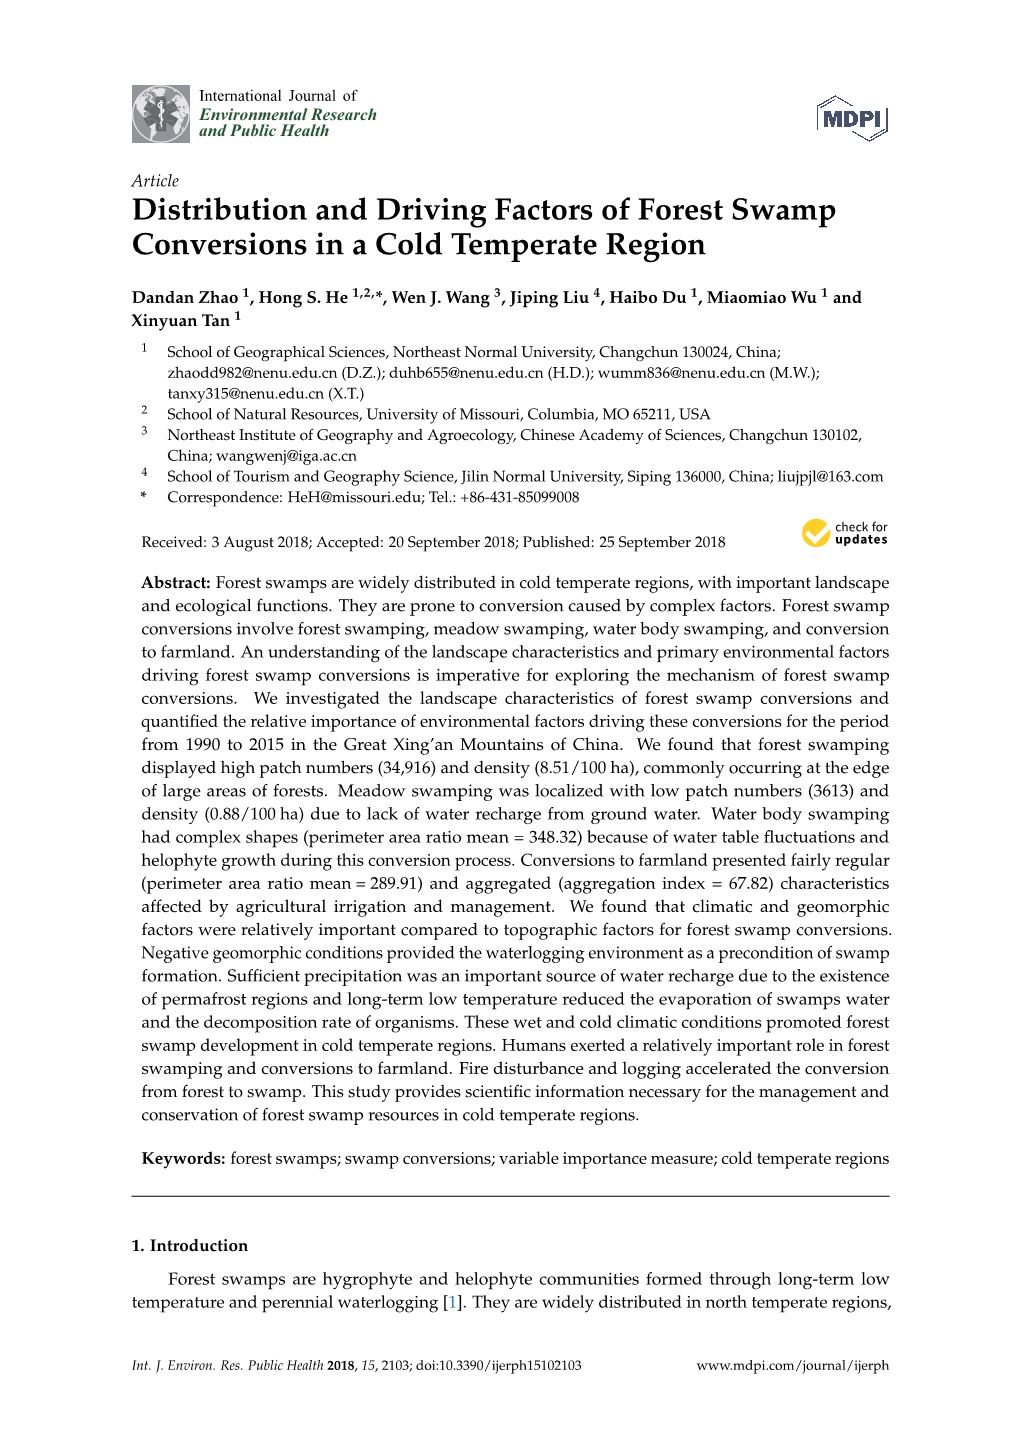 Distribution and Driving Factors of Forest Swamp Conversions in a Cold Temperate Region